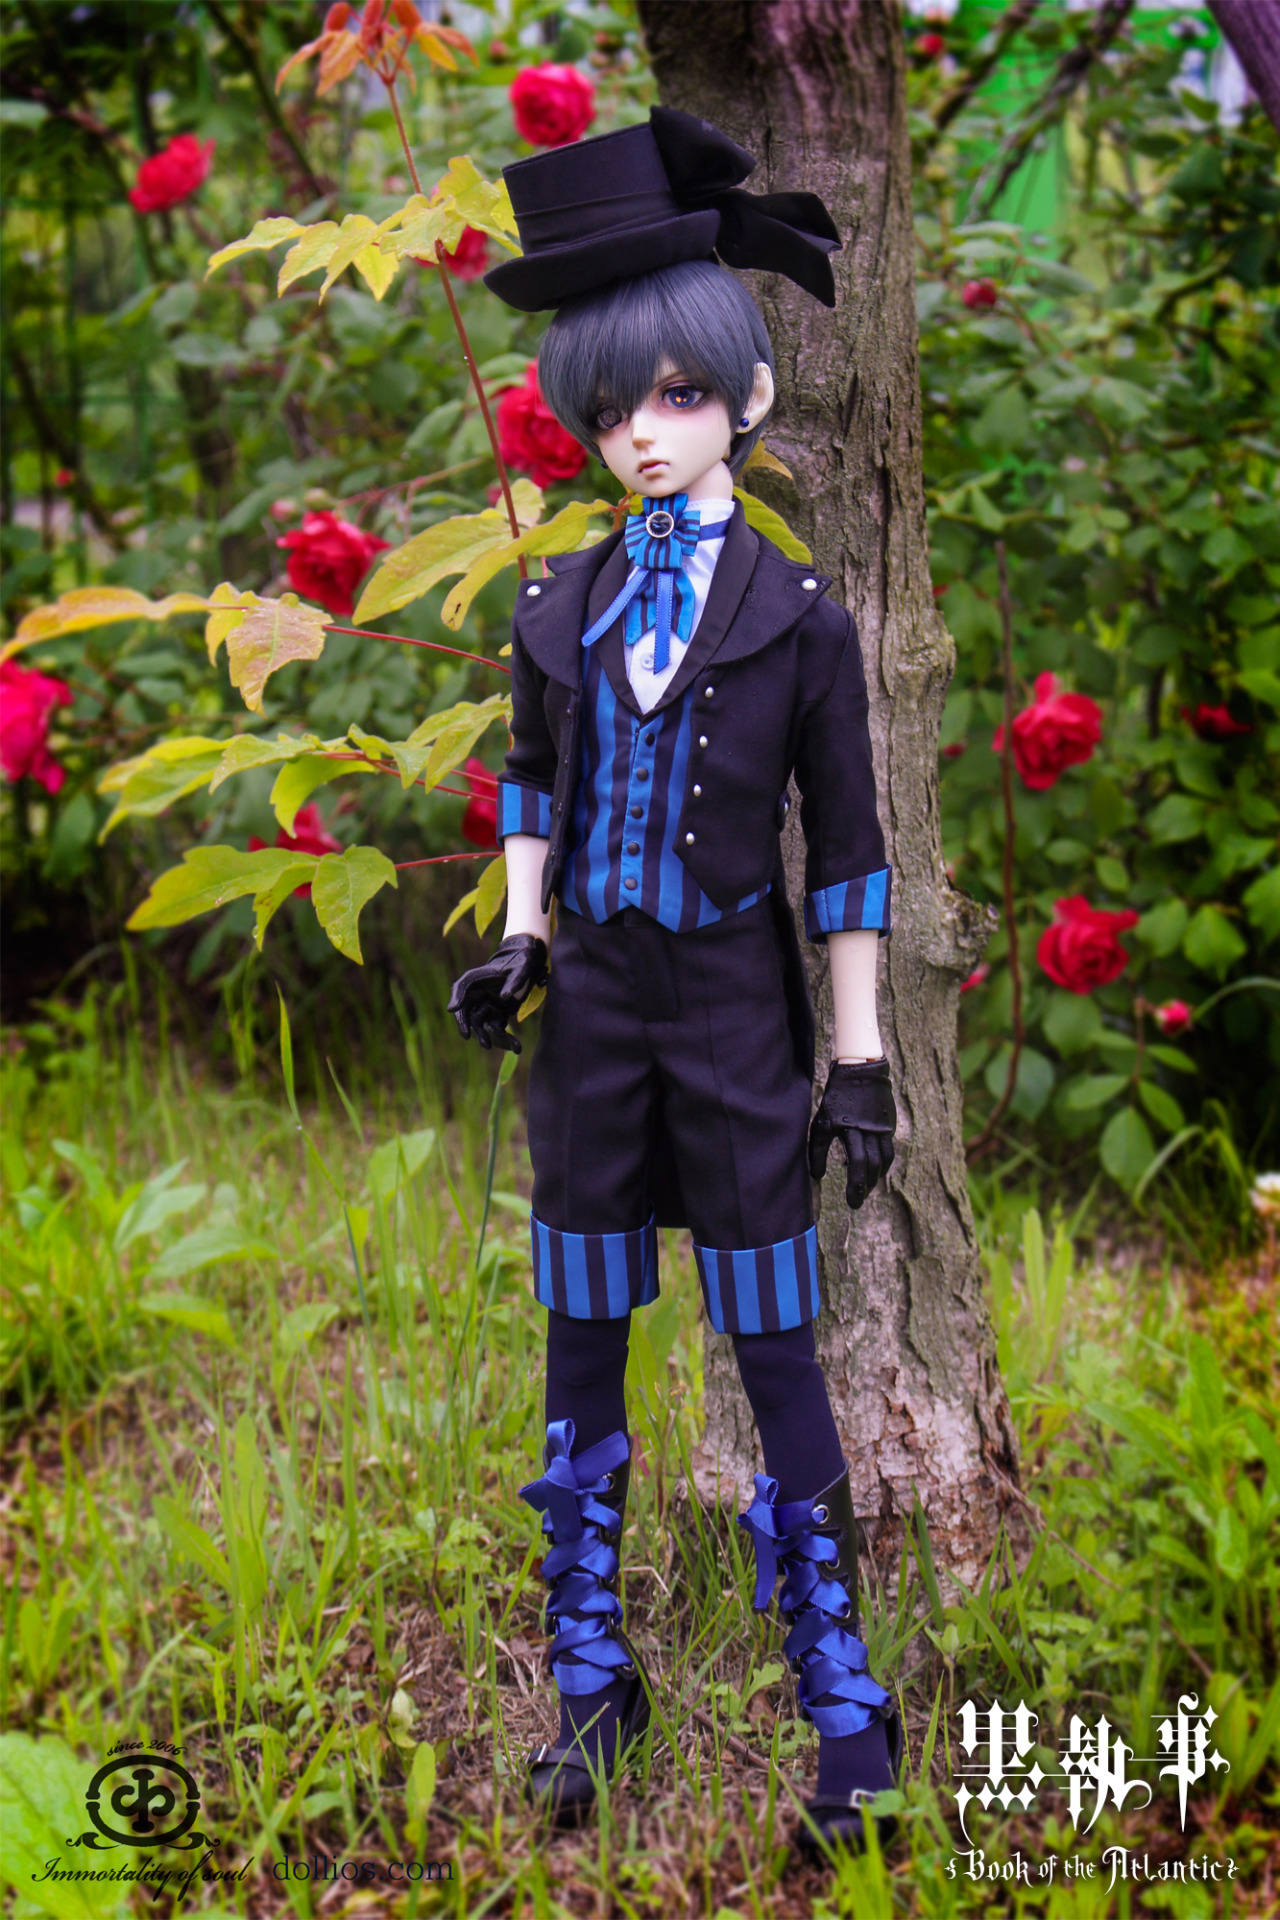 New Ciel looks majectic! Funfact: Actually, Alois and Doll don't even have  a grave. ⋆ ───────── 𖤐 ───────── ⋆ ꒰ 🕸️ ꒱ 𝐈𝐍𝐅𝐎 ： 雨 ⁝ 𝖺𝗇𝗂𝗆𝖾…